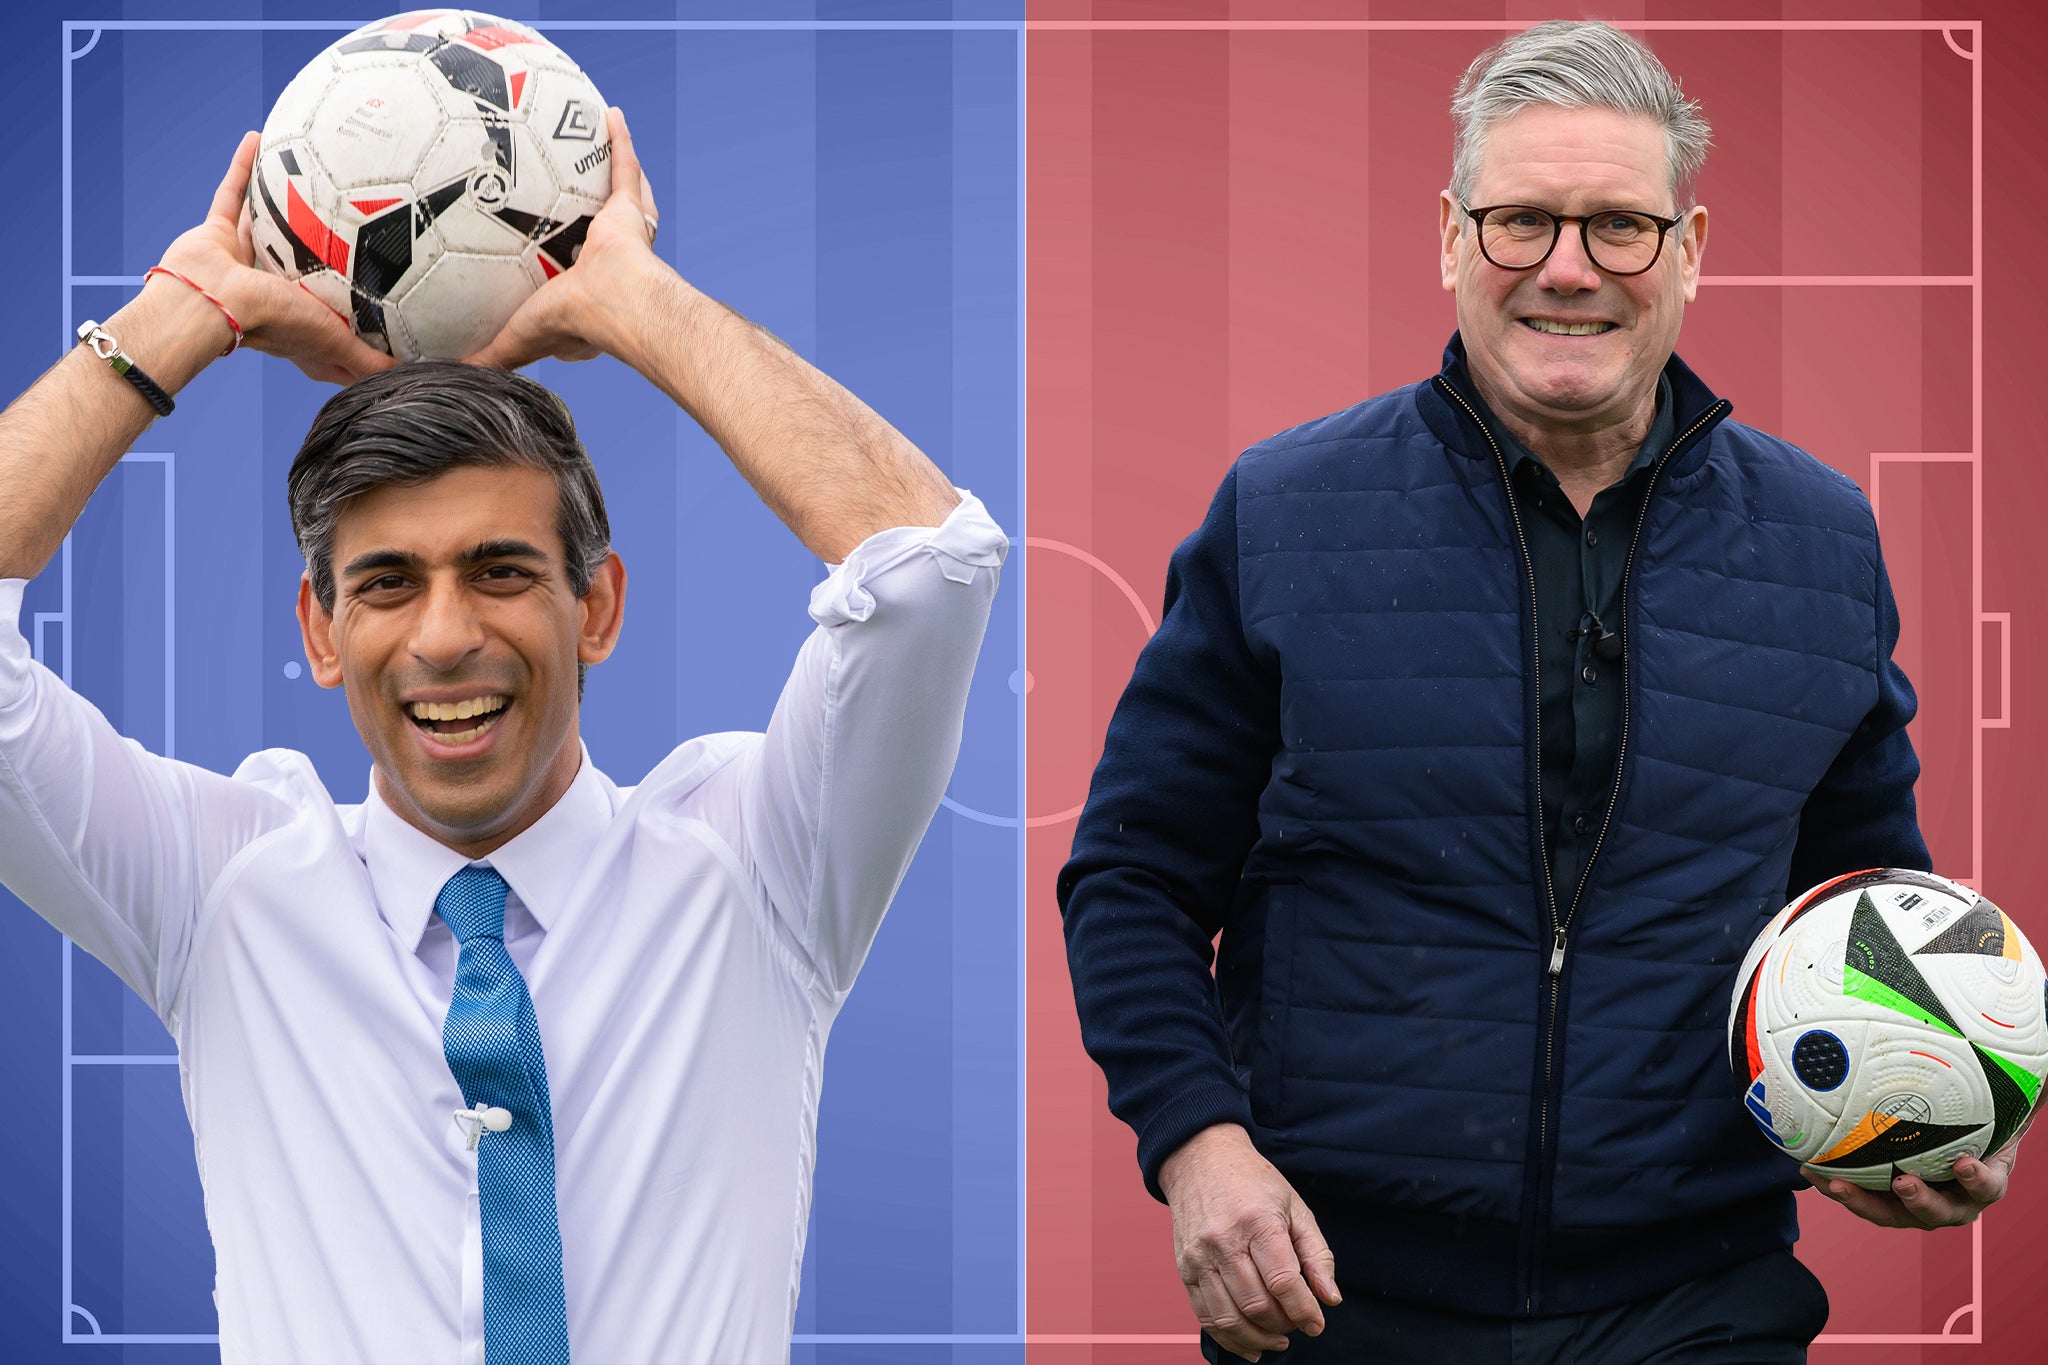 england, voters, keir starmer, rishi sunak, serbia, leader, ed davey, general election, nigel farage, voters reveal which political leader they would like to manage the england football team